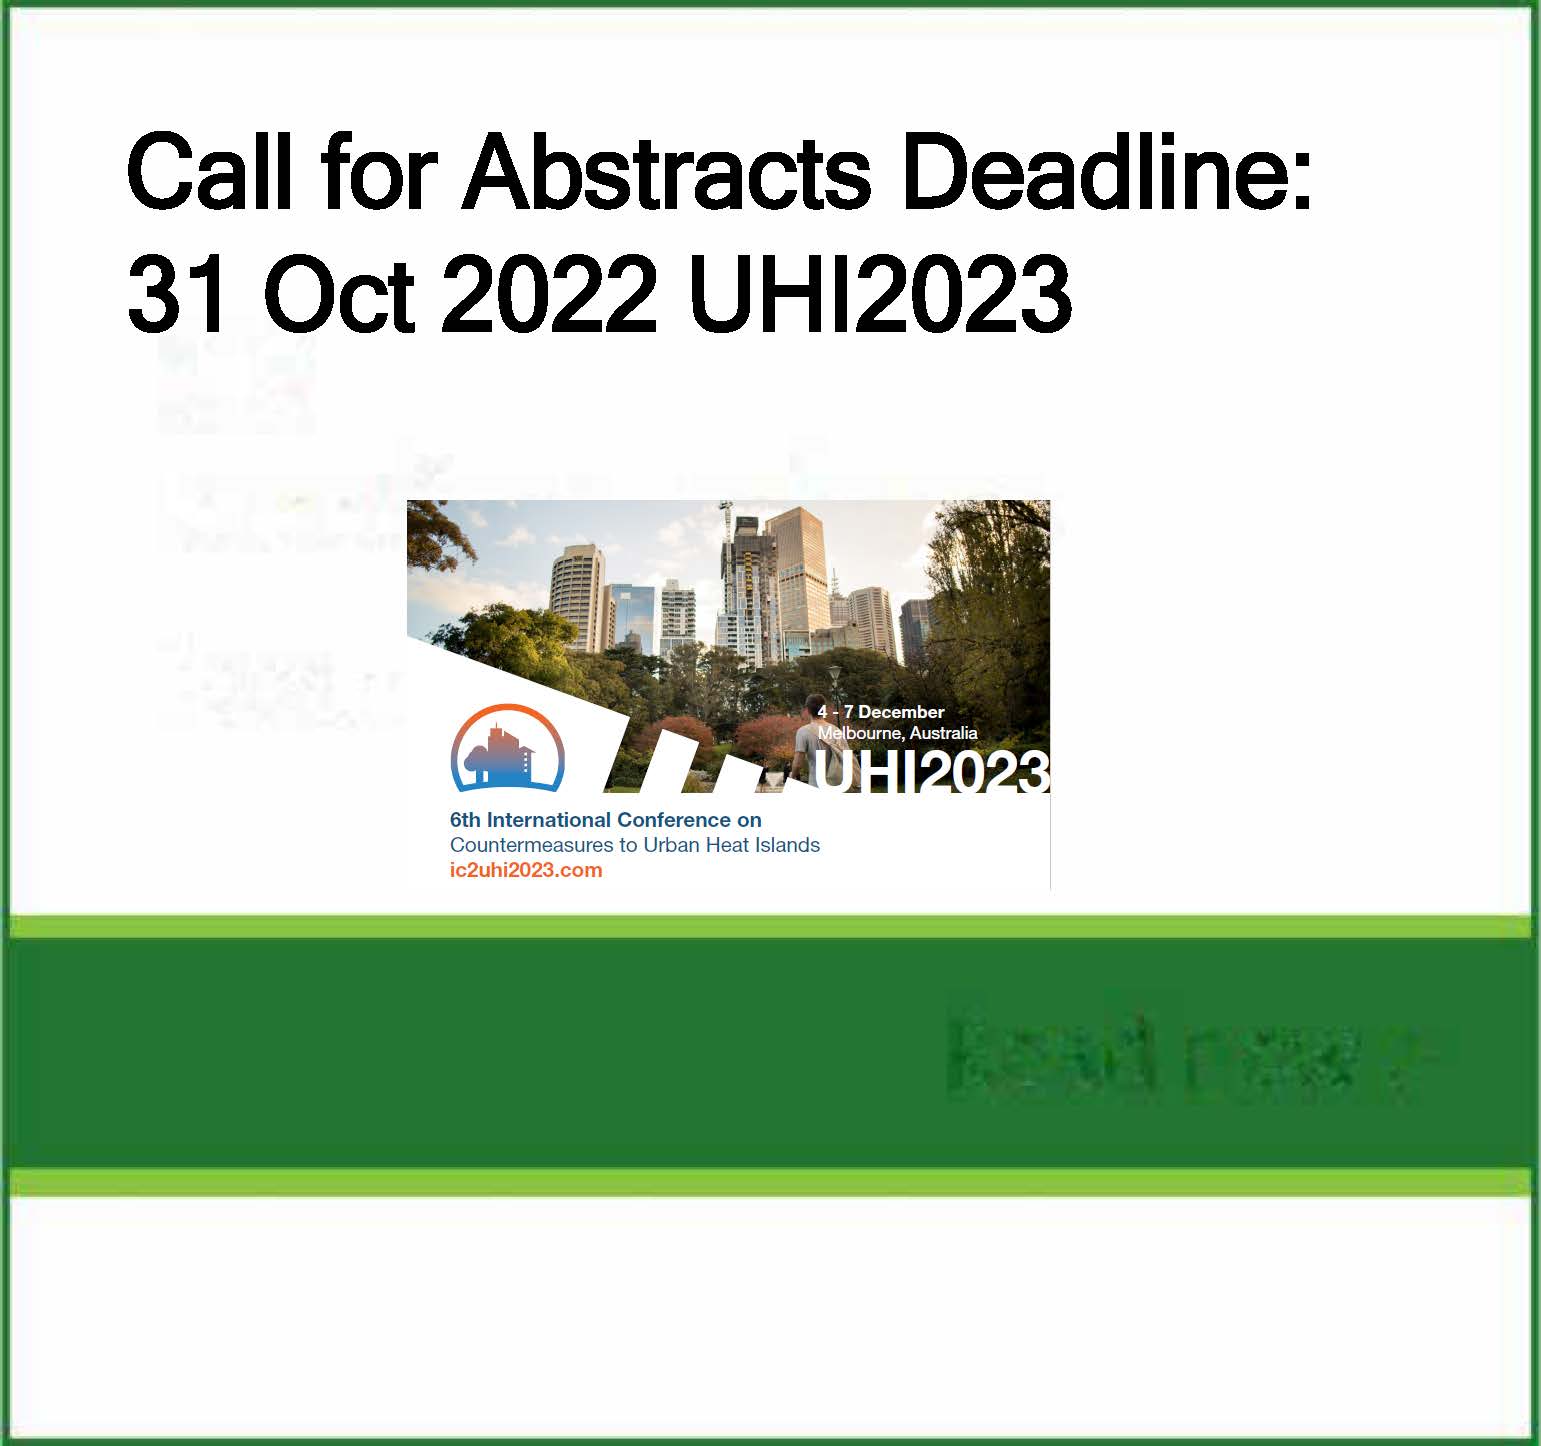 Call for Abstracts Deadline: 31 October 2022 – 6th International Conference on Countermeasures to Urban Heat Islands